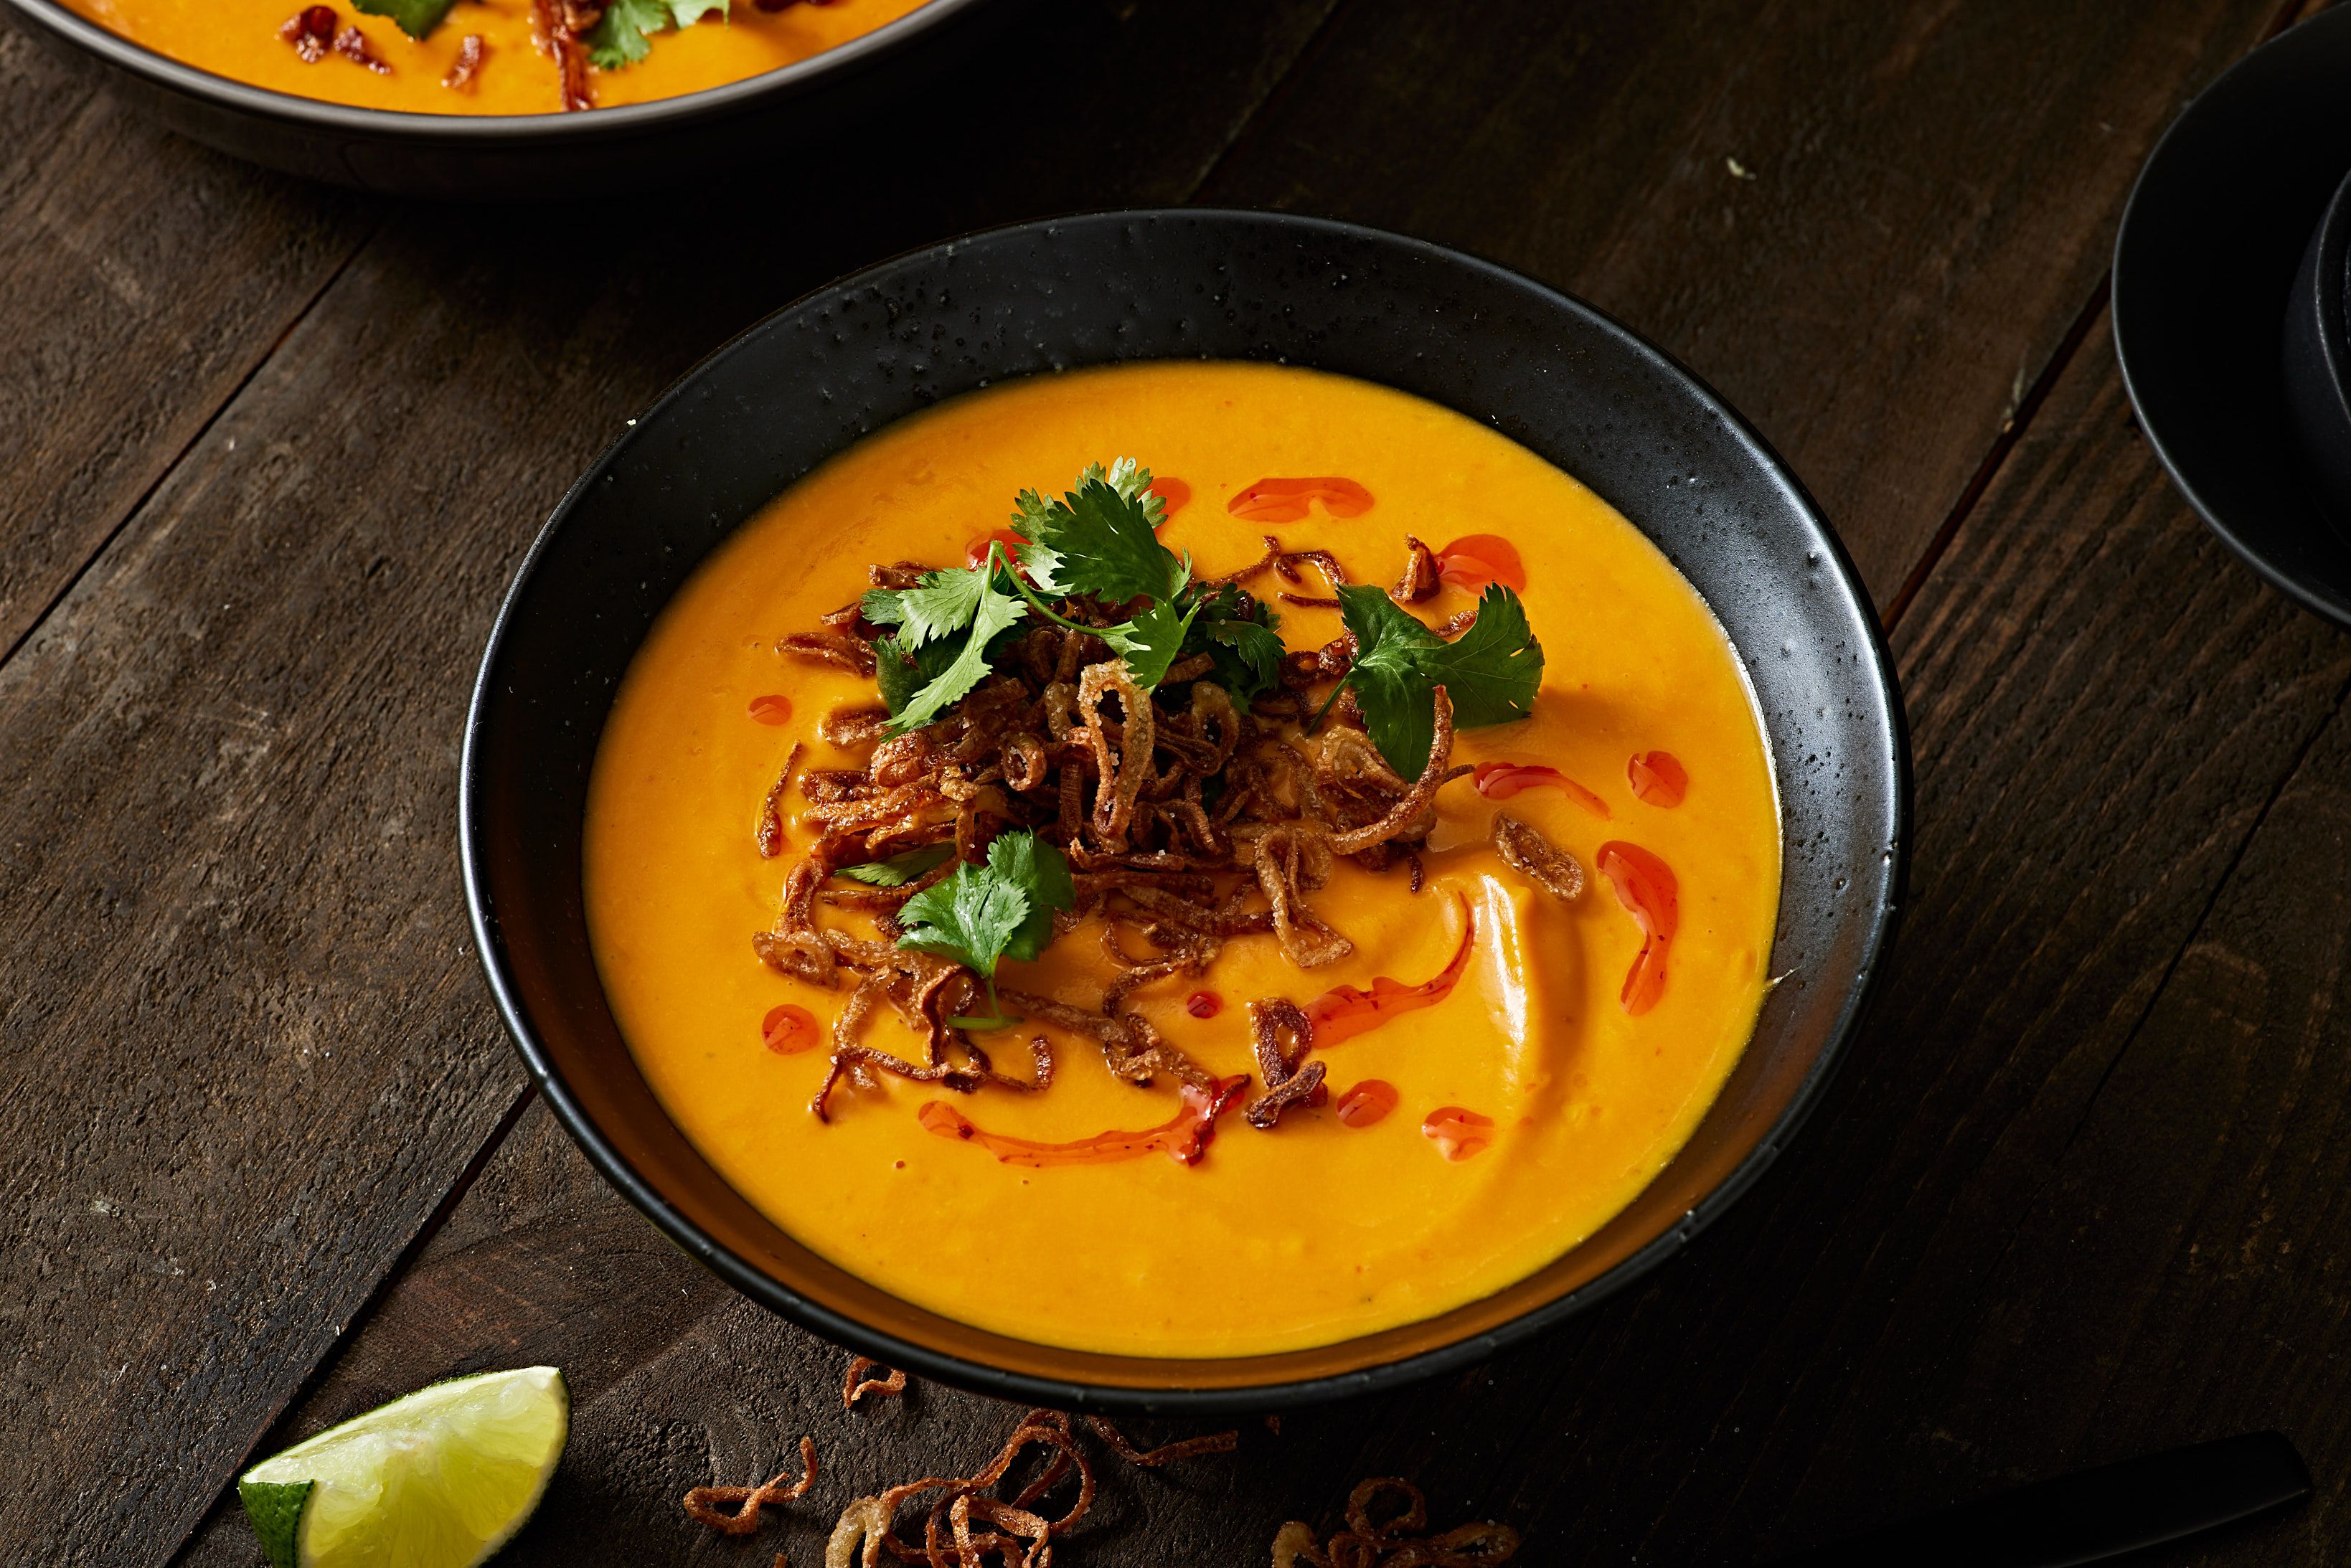 Carrot and ginger soup recipe